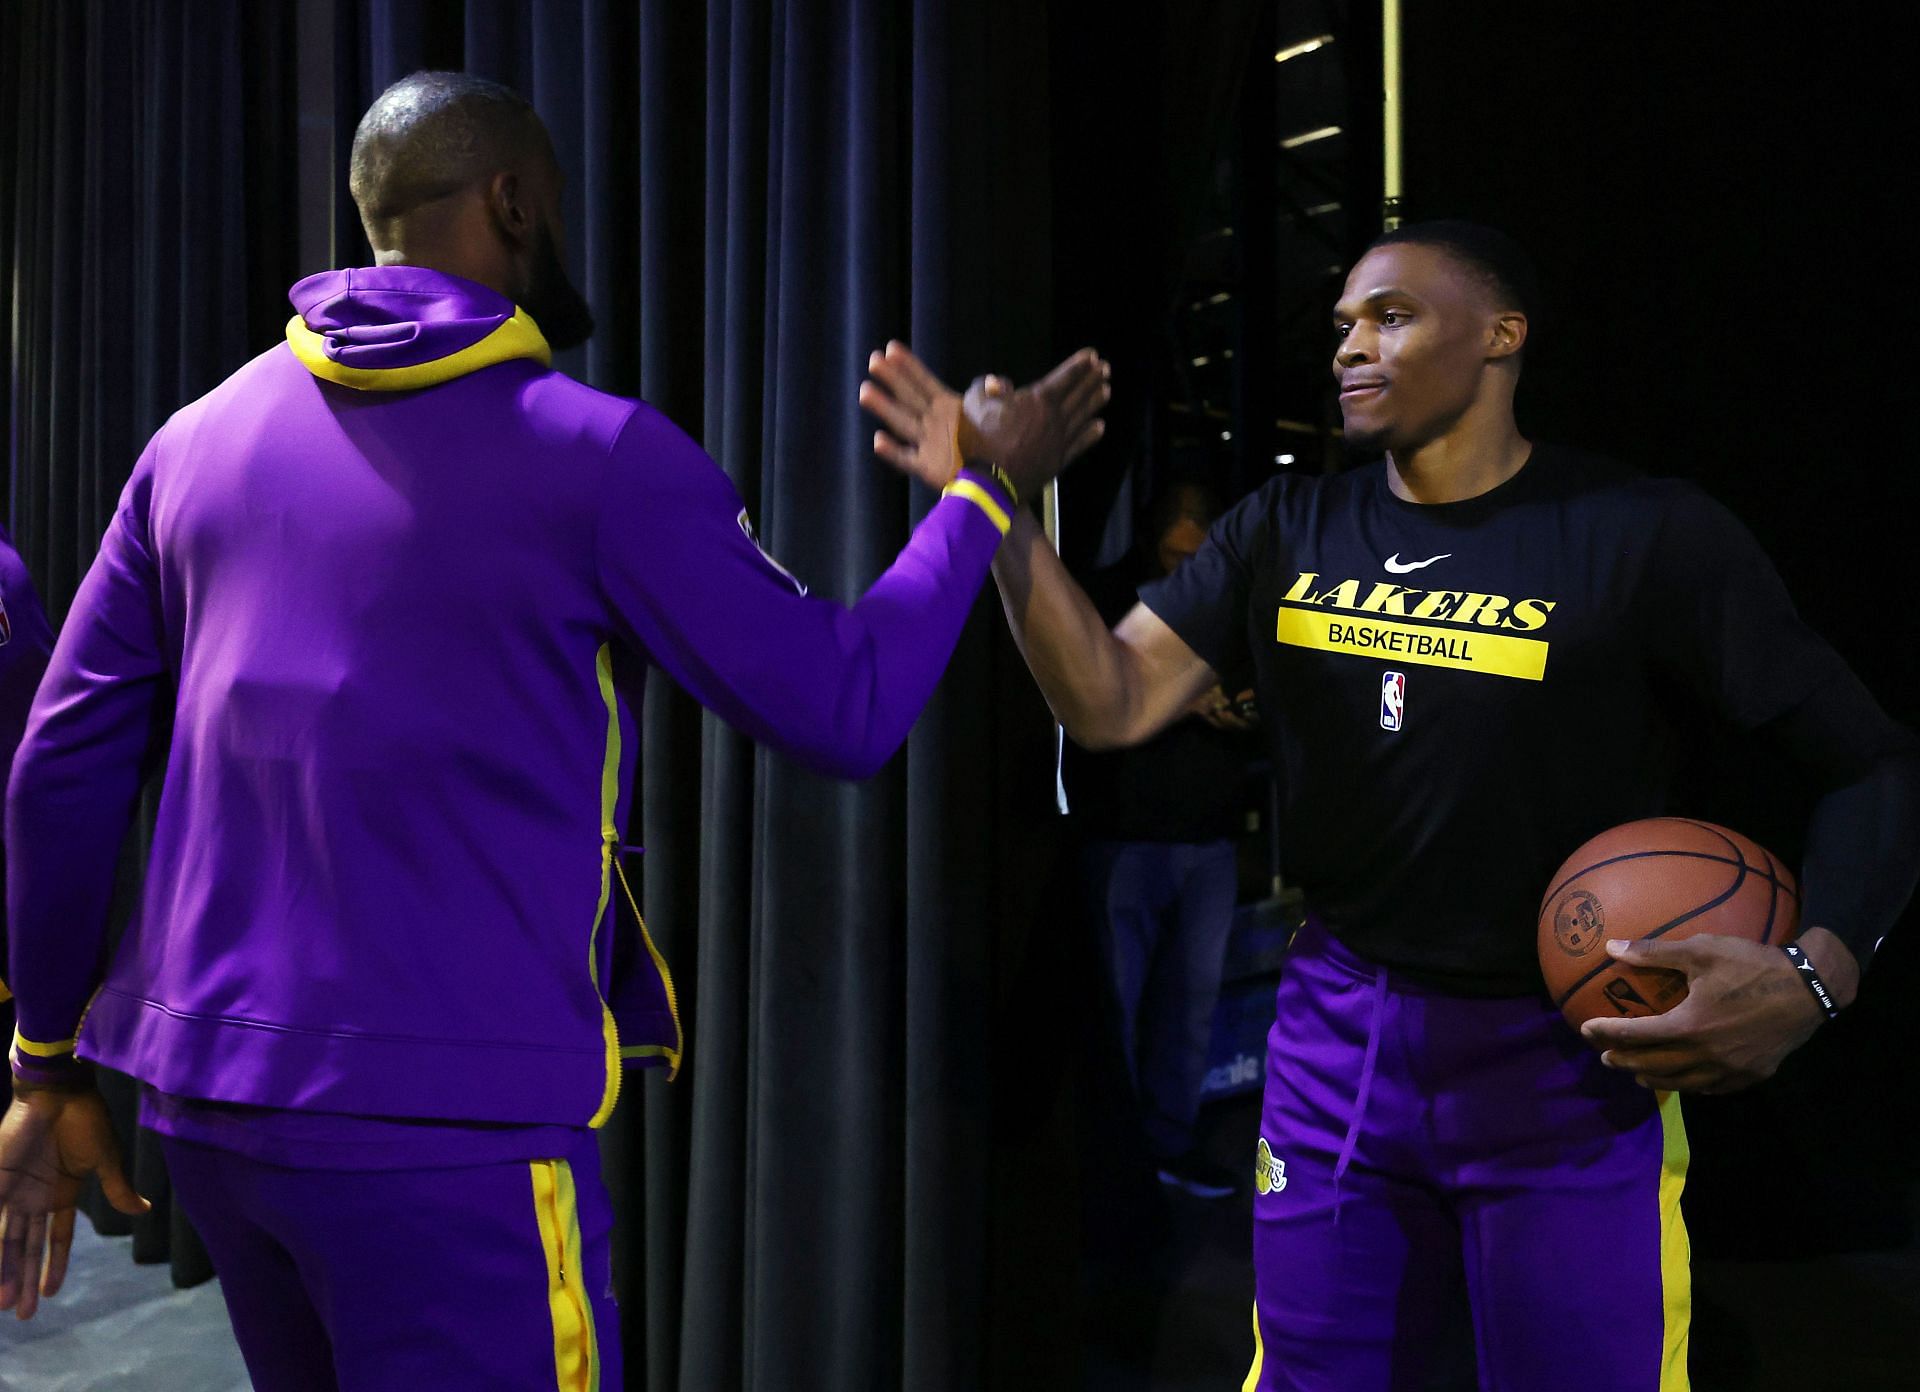 LeBron James has a new neighbor after LA Lakers teammate Russell Westbrook buys $37 million home right across the street: All you need to know